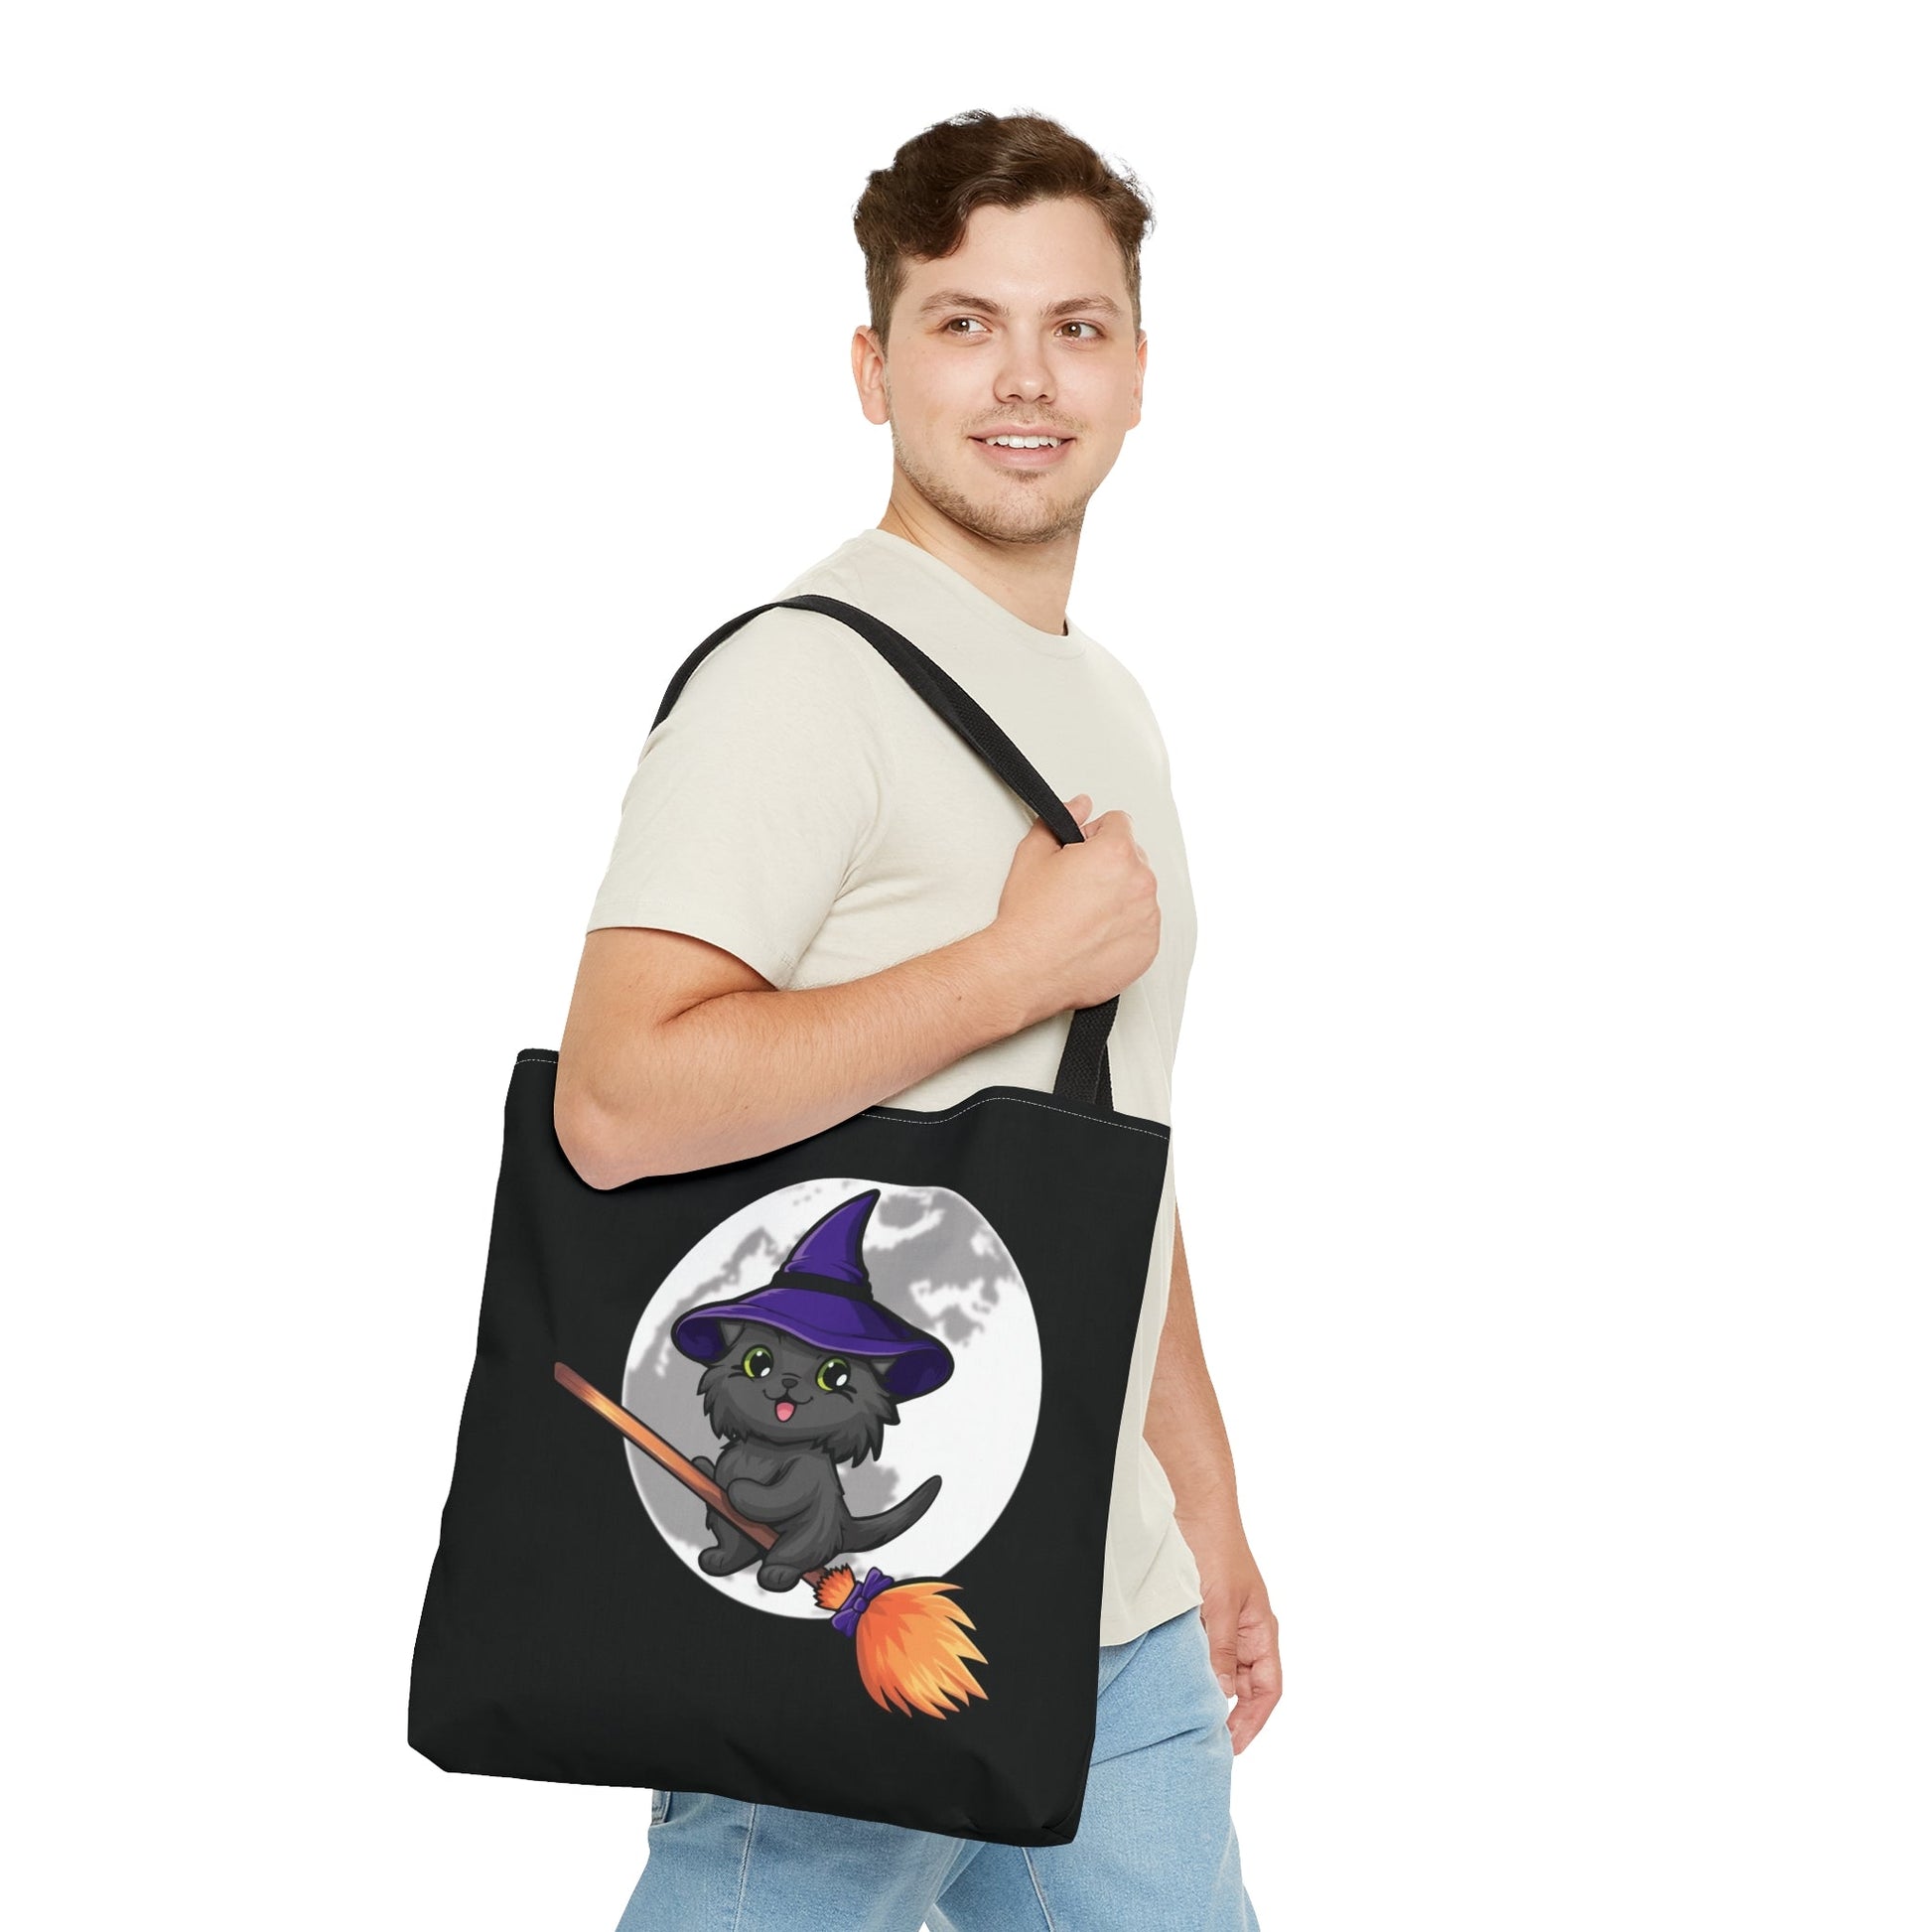 Kitty Flew Over the Moon Tote Bag - Driftless Enchantments